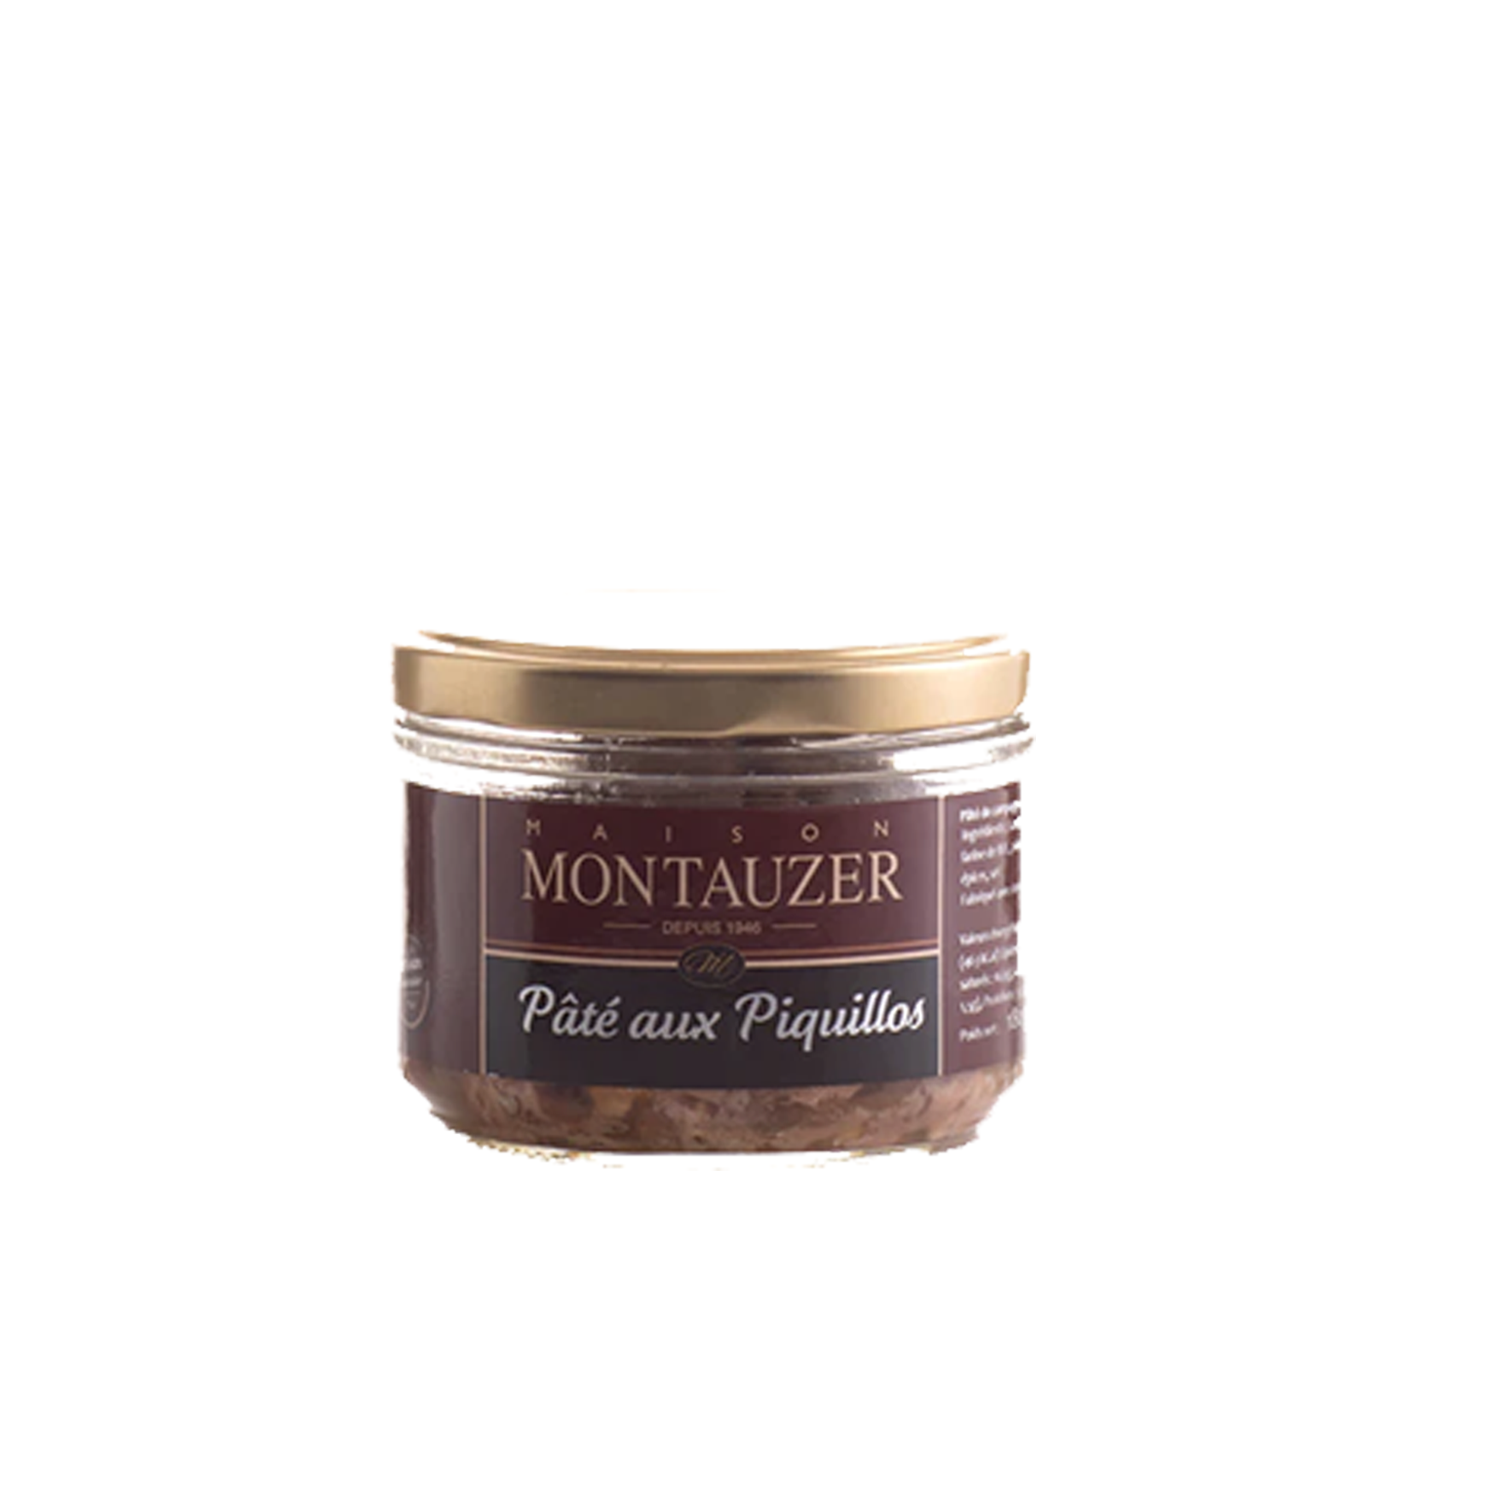 Pate aux Piquillos by Montauzer 180g